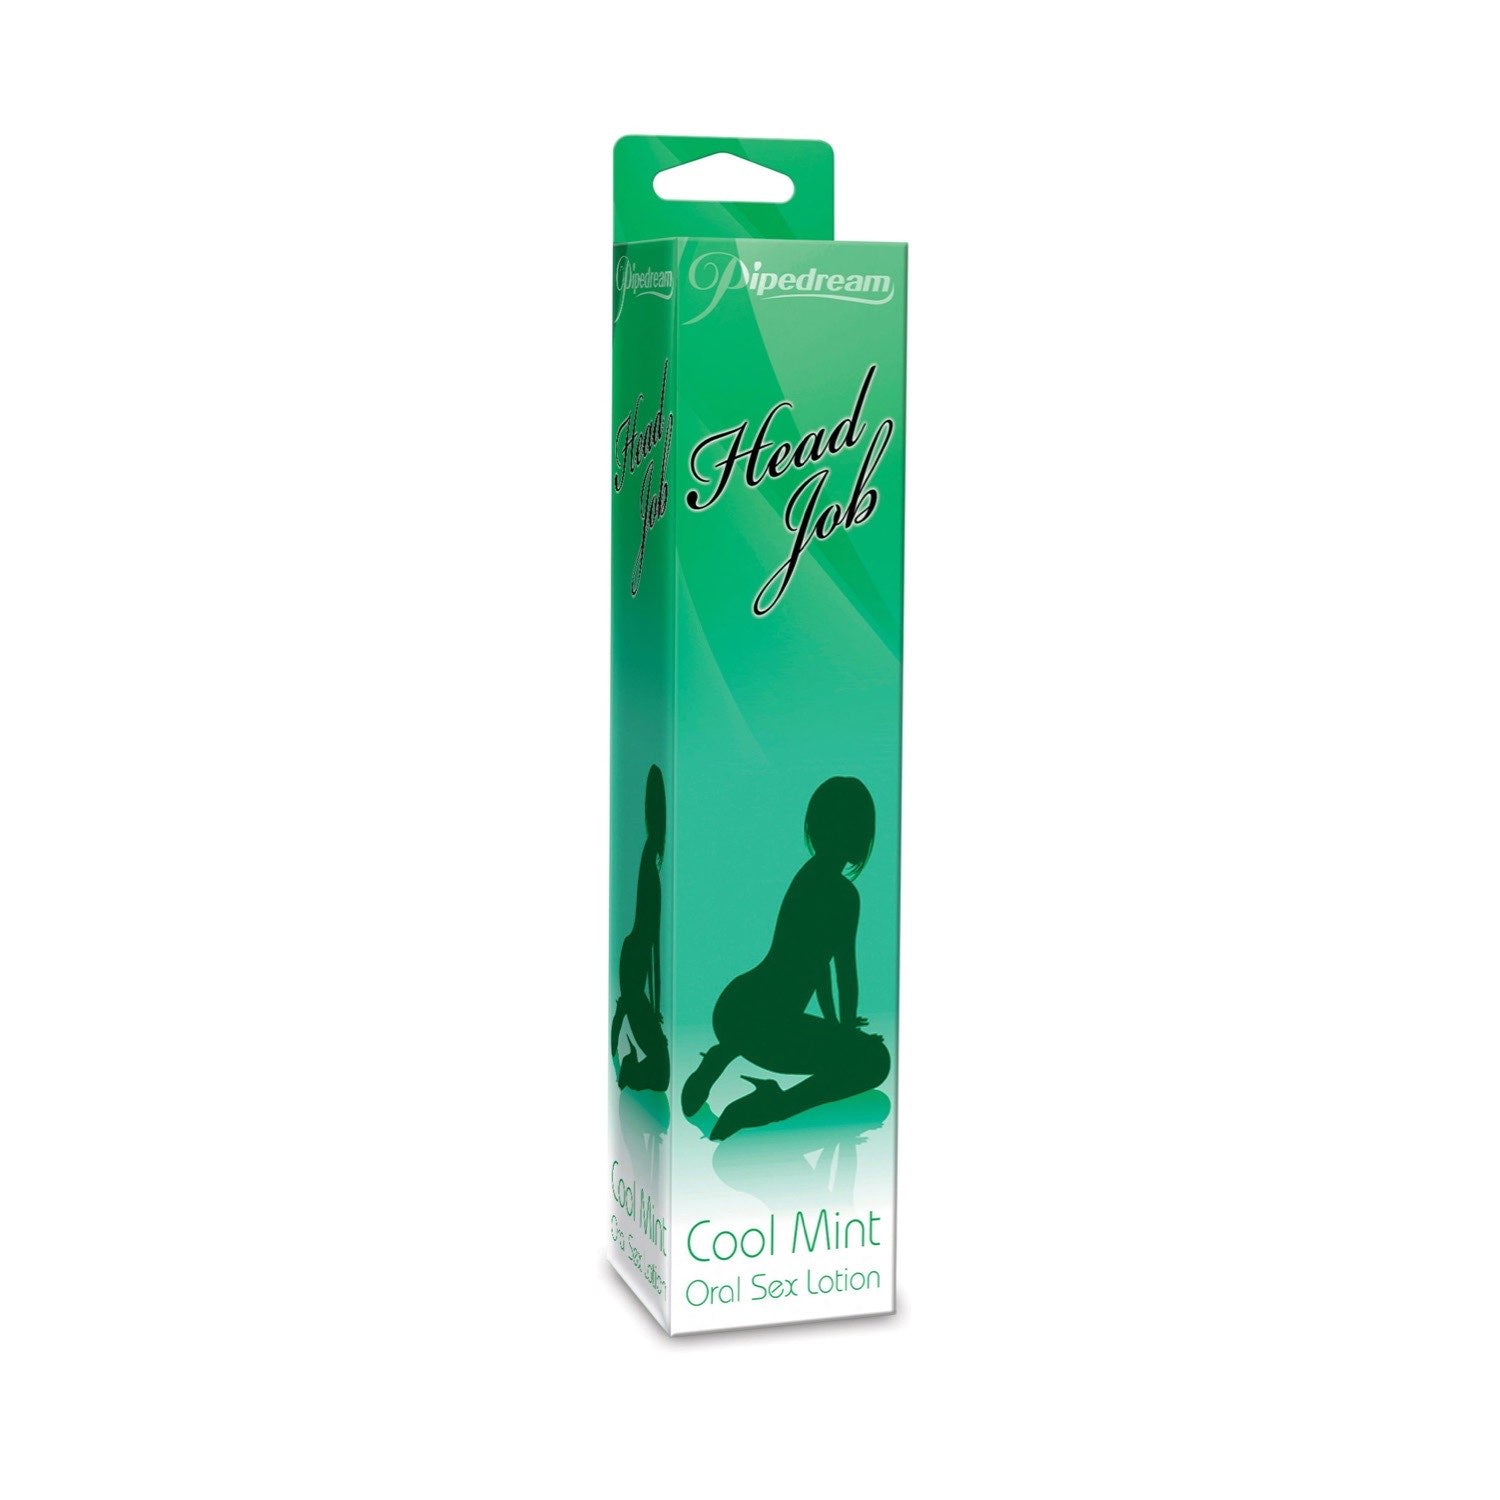  Head Job - Mint Flavoured Oral Sex Lotion - 1.5 oz Tube by Pipedream